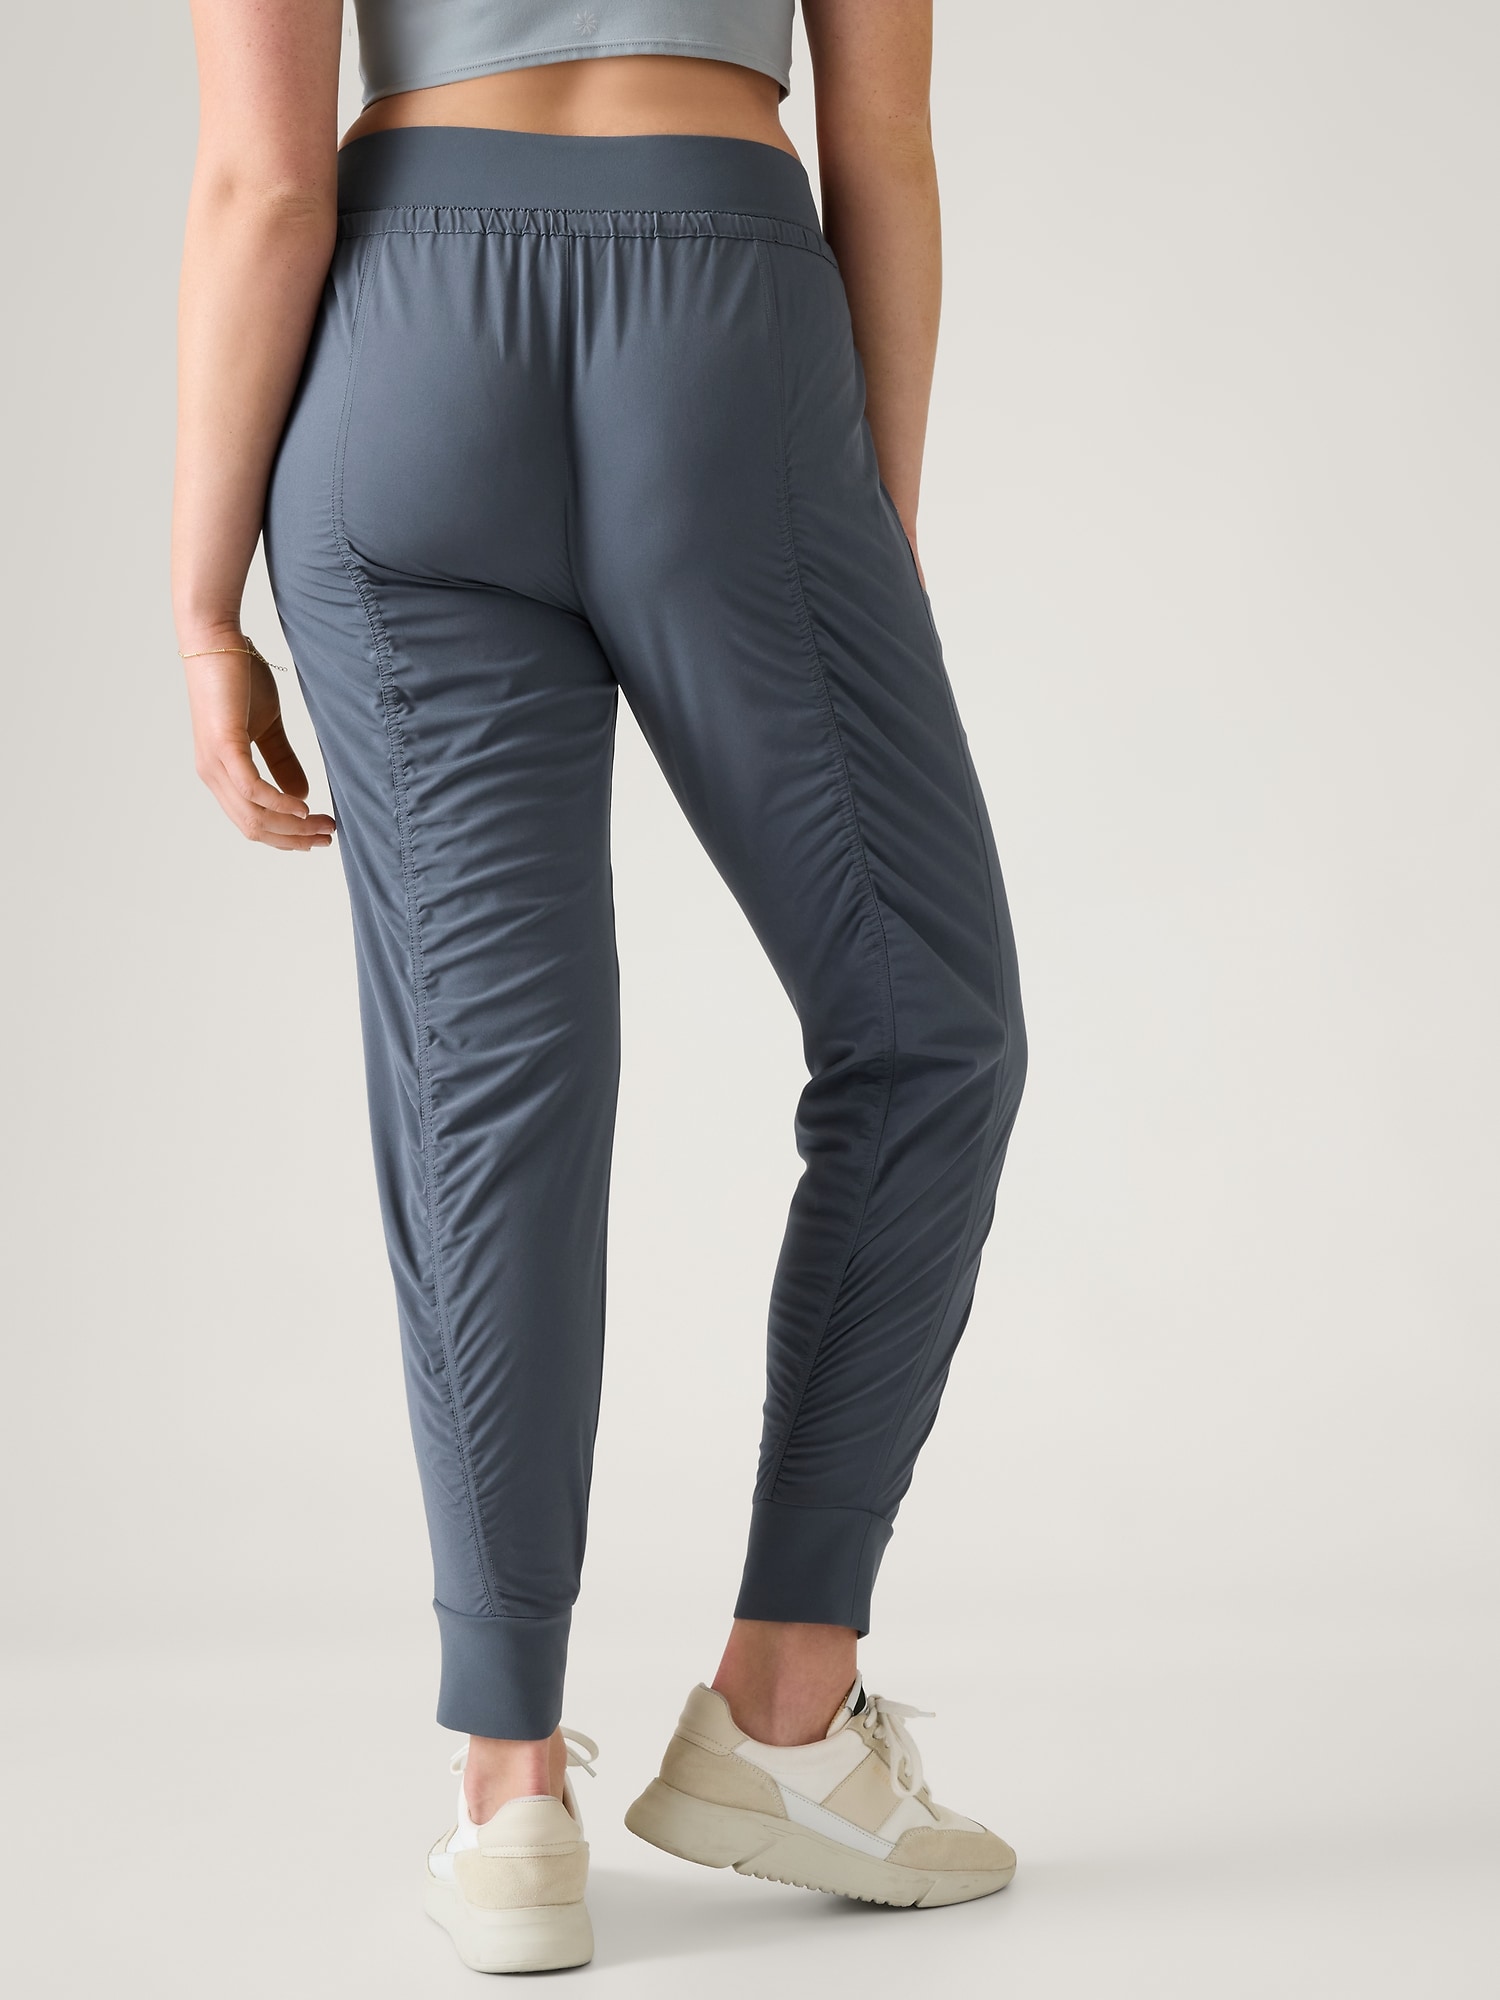 Find more Lululemon Size 2 Dance Studio Pant Ii for sale at up to 90% off